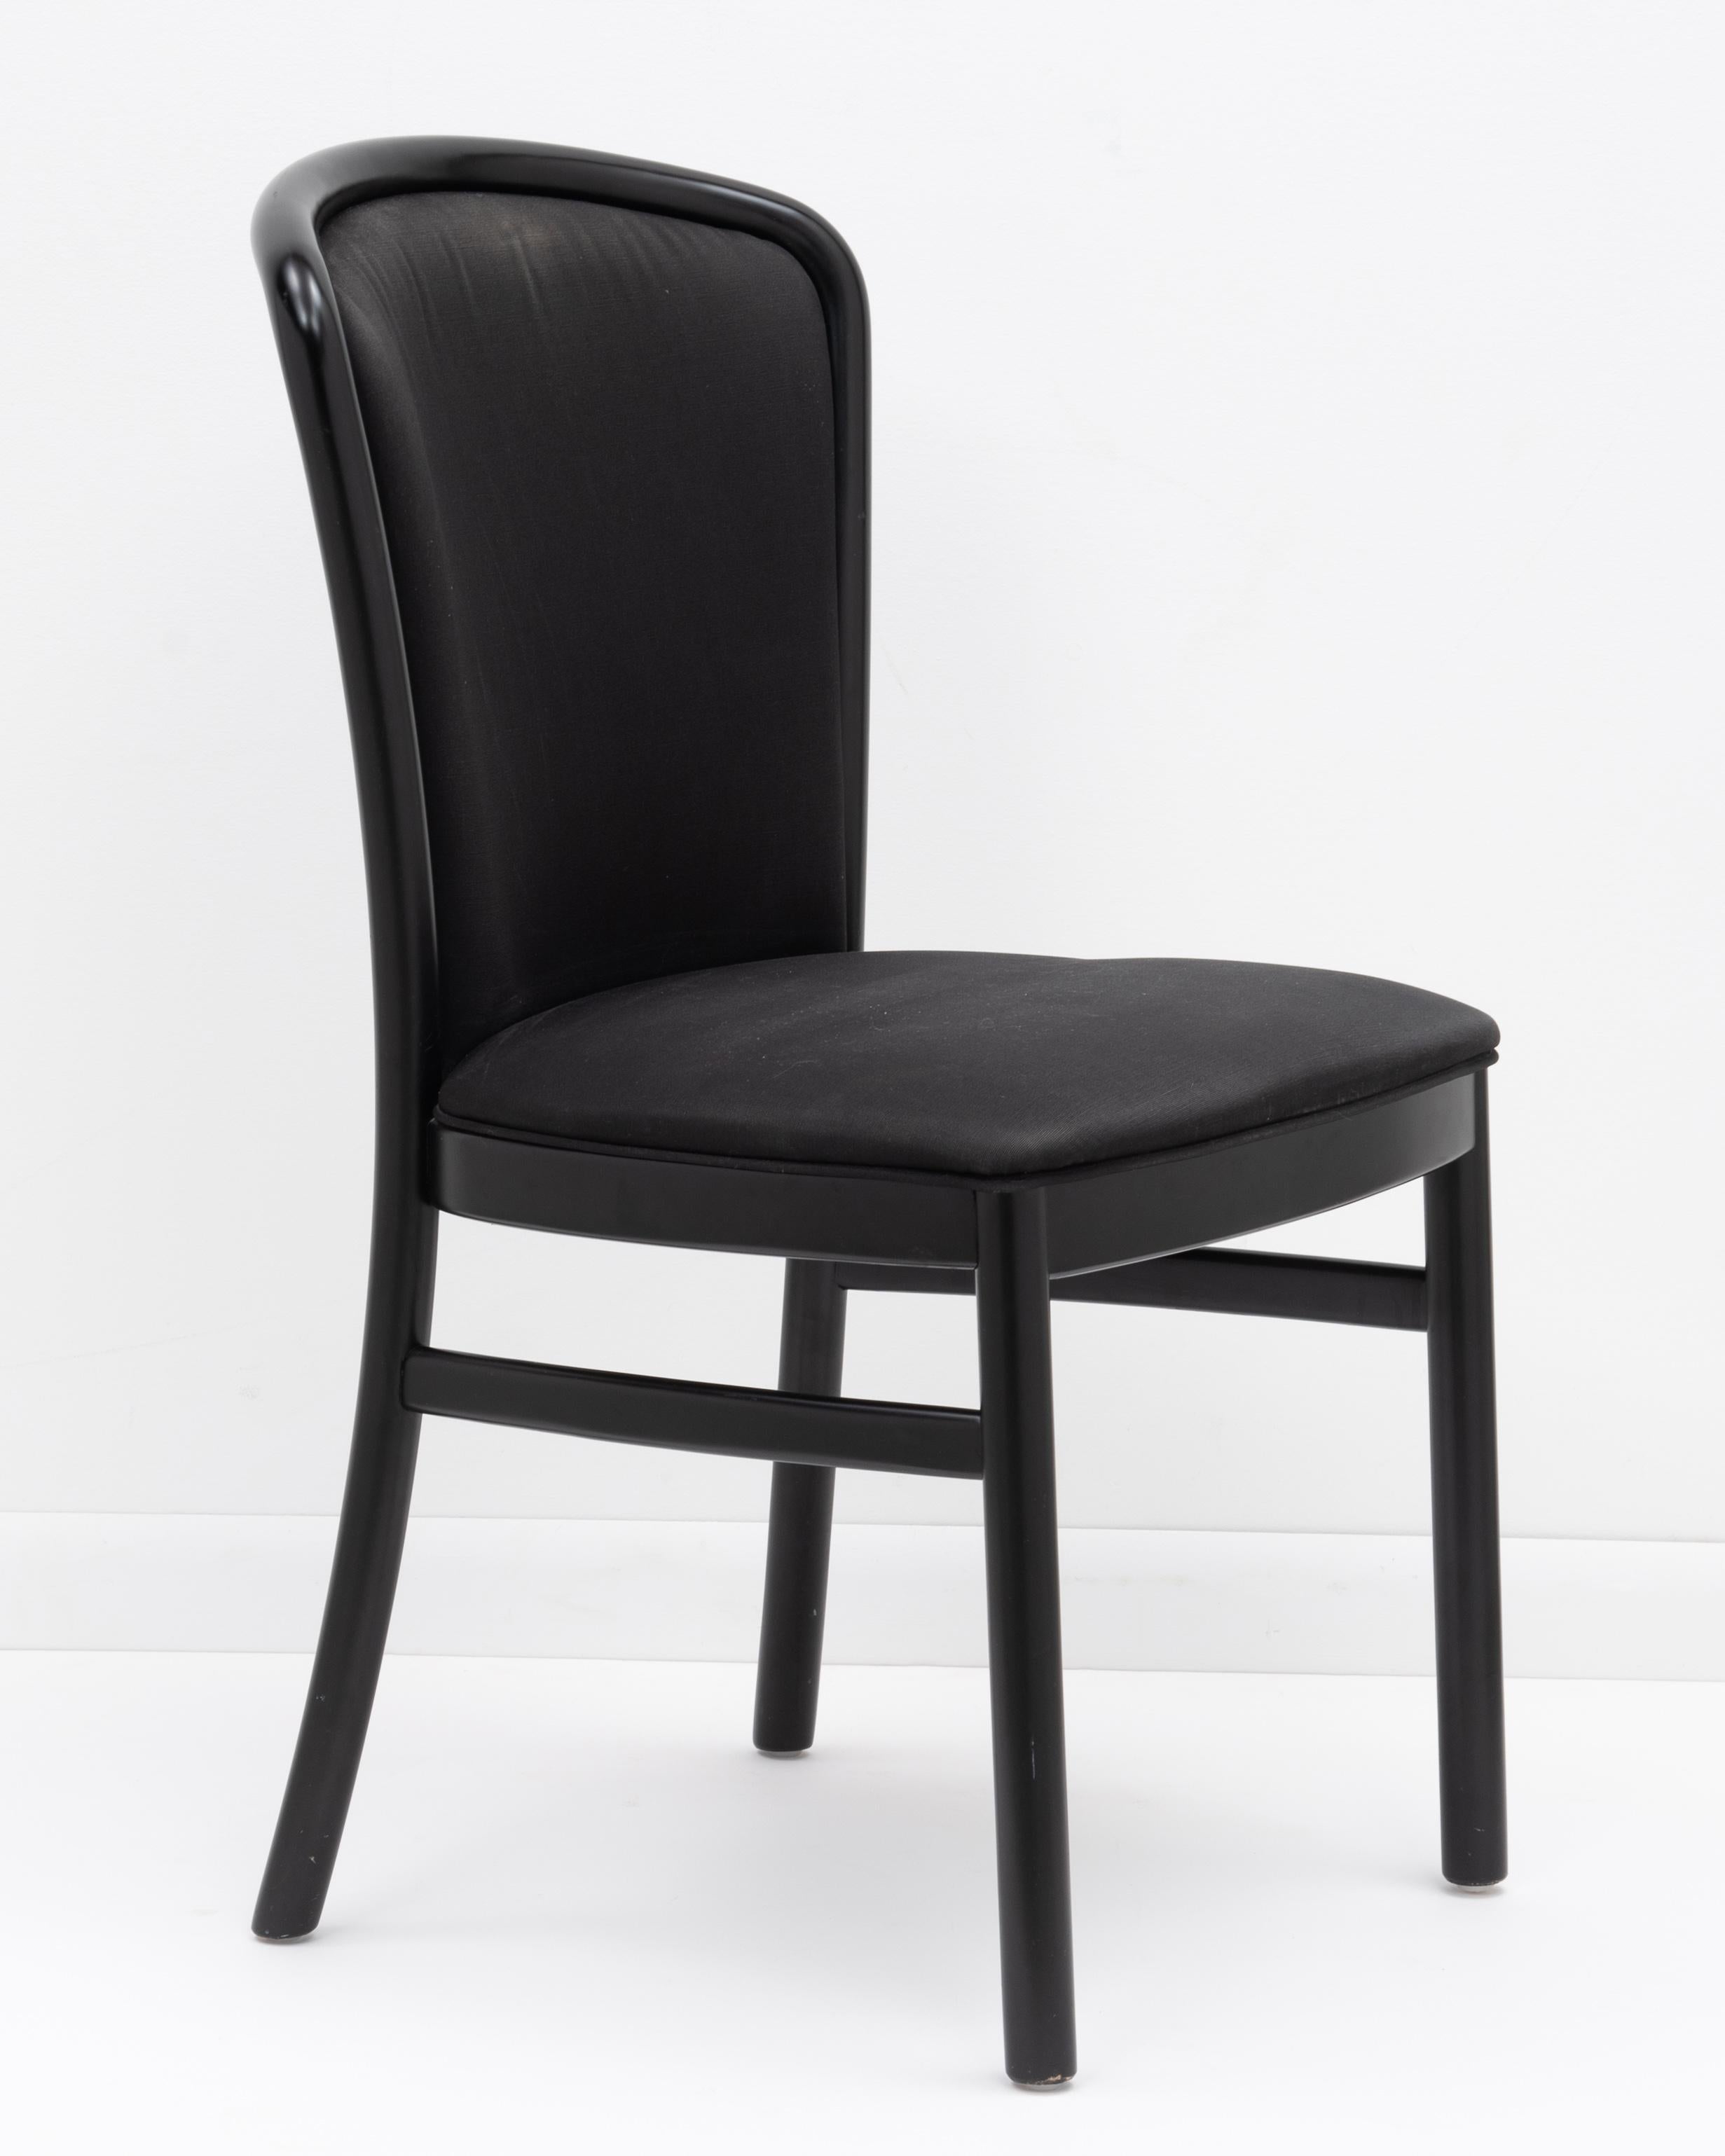 Late 20th Century Postmodern Italian Black Lacquer Tonon Dining Chairs Ello - a Set of Ten For Sale